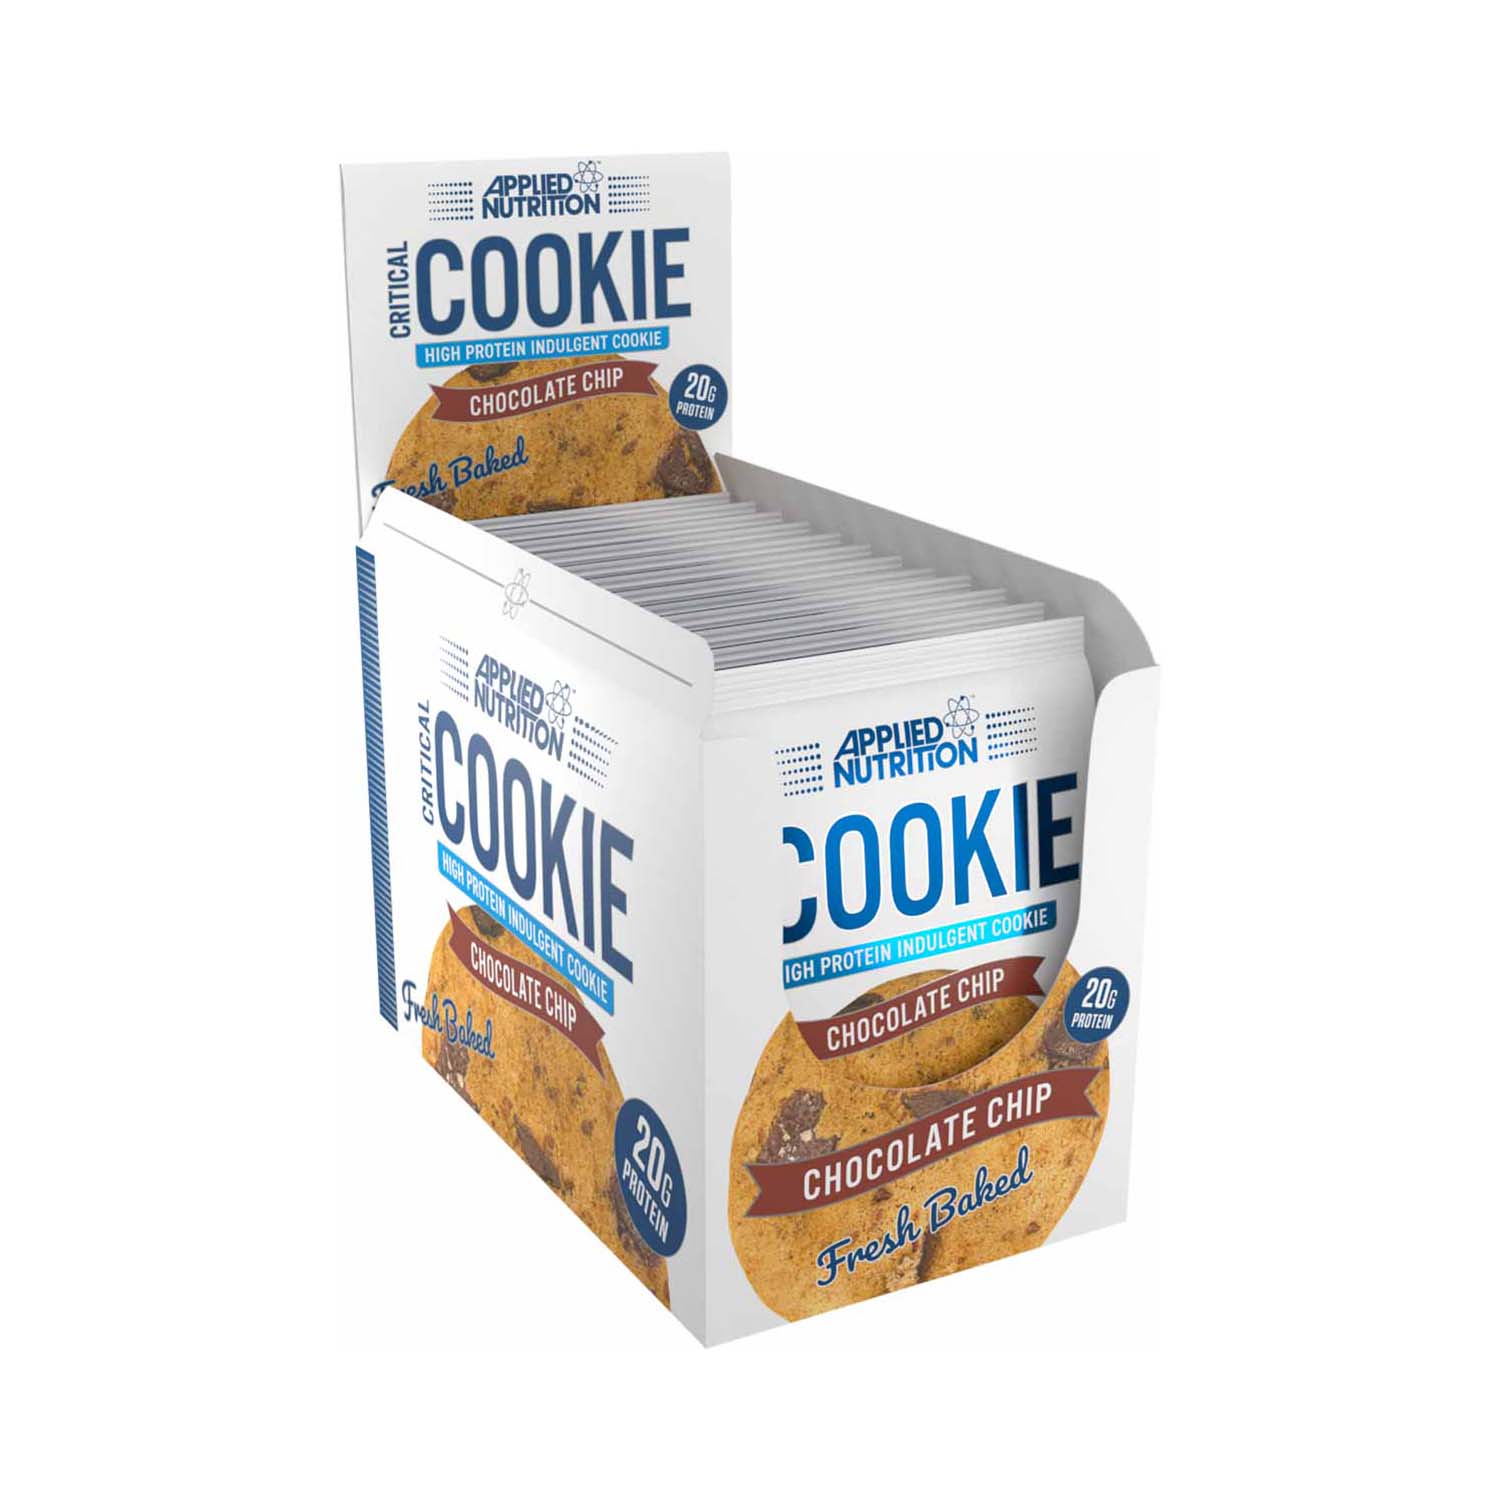 Applied Nutrition Critical Cookie Box of 12 Pieces Chocolate Chip